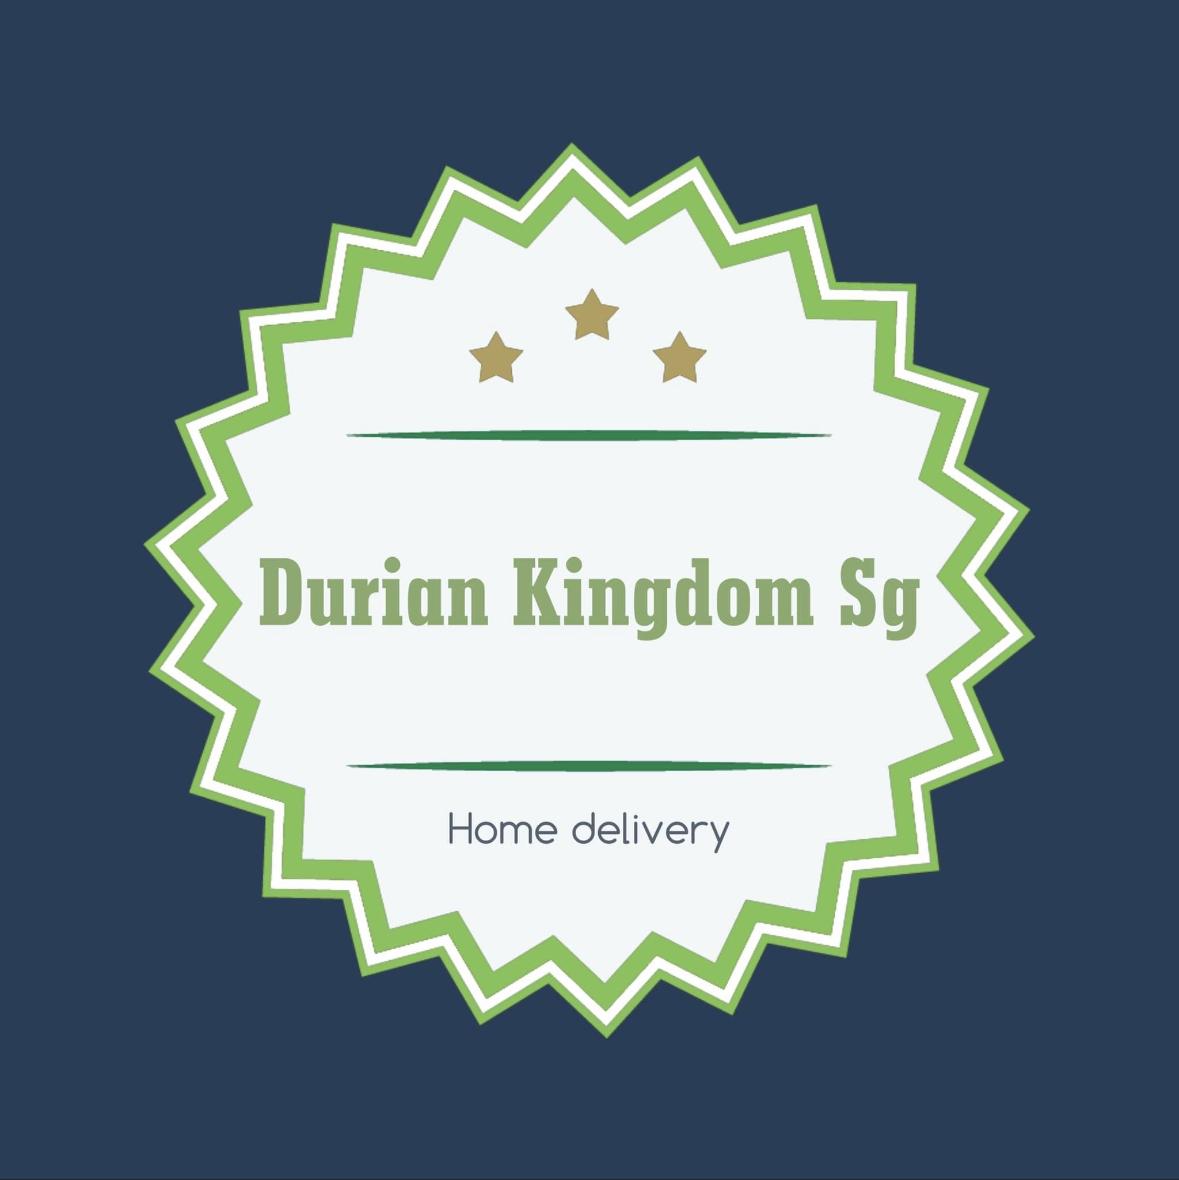 Durian Kingdom's images